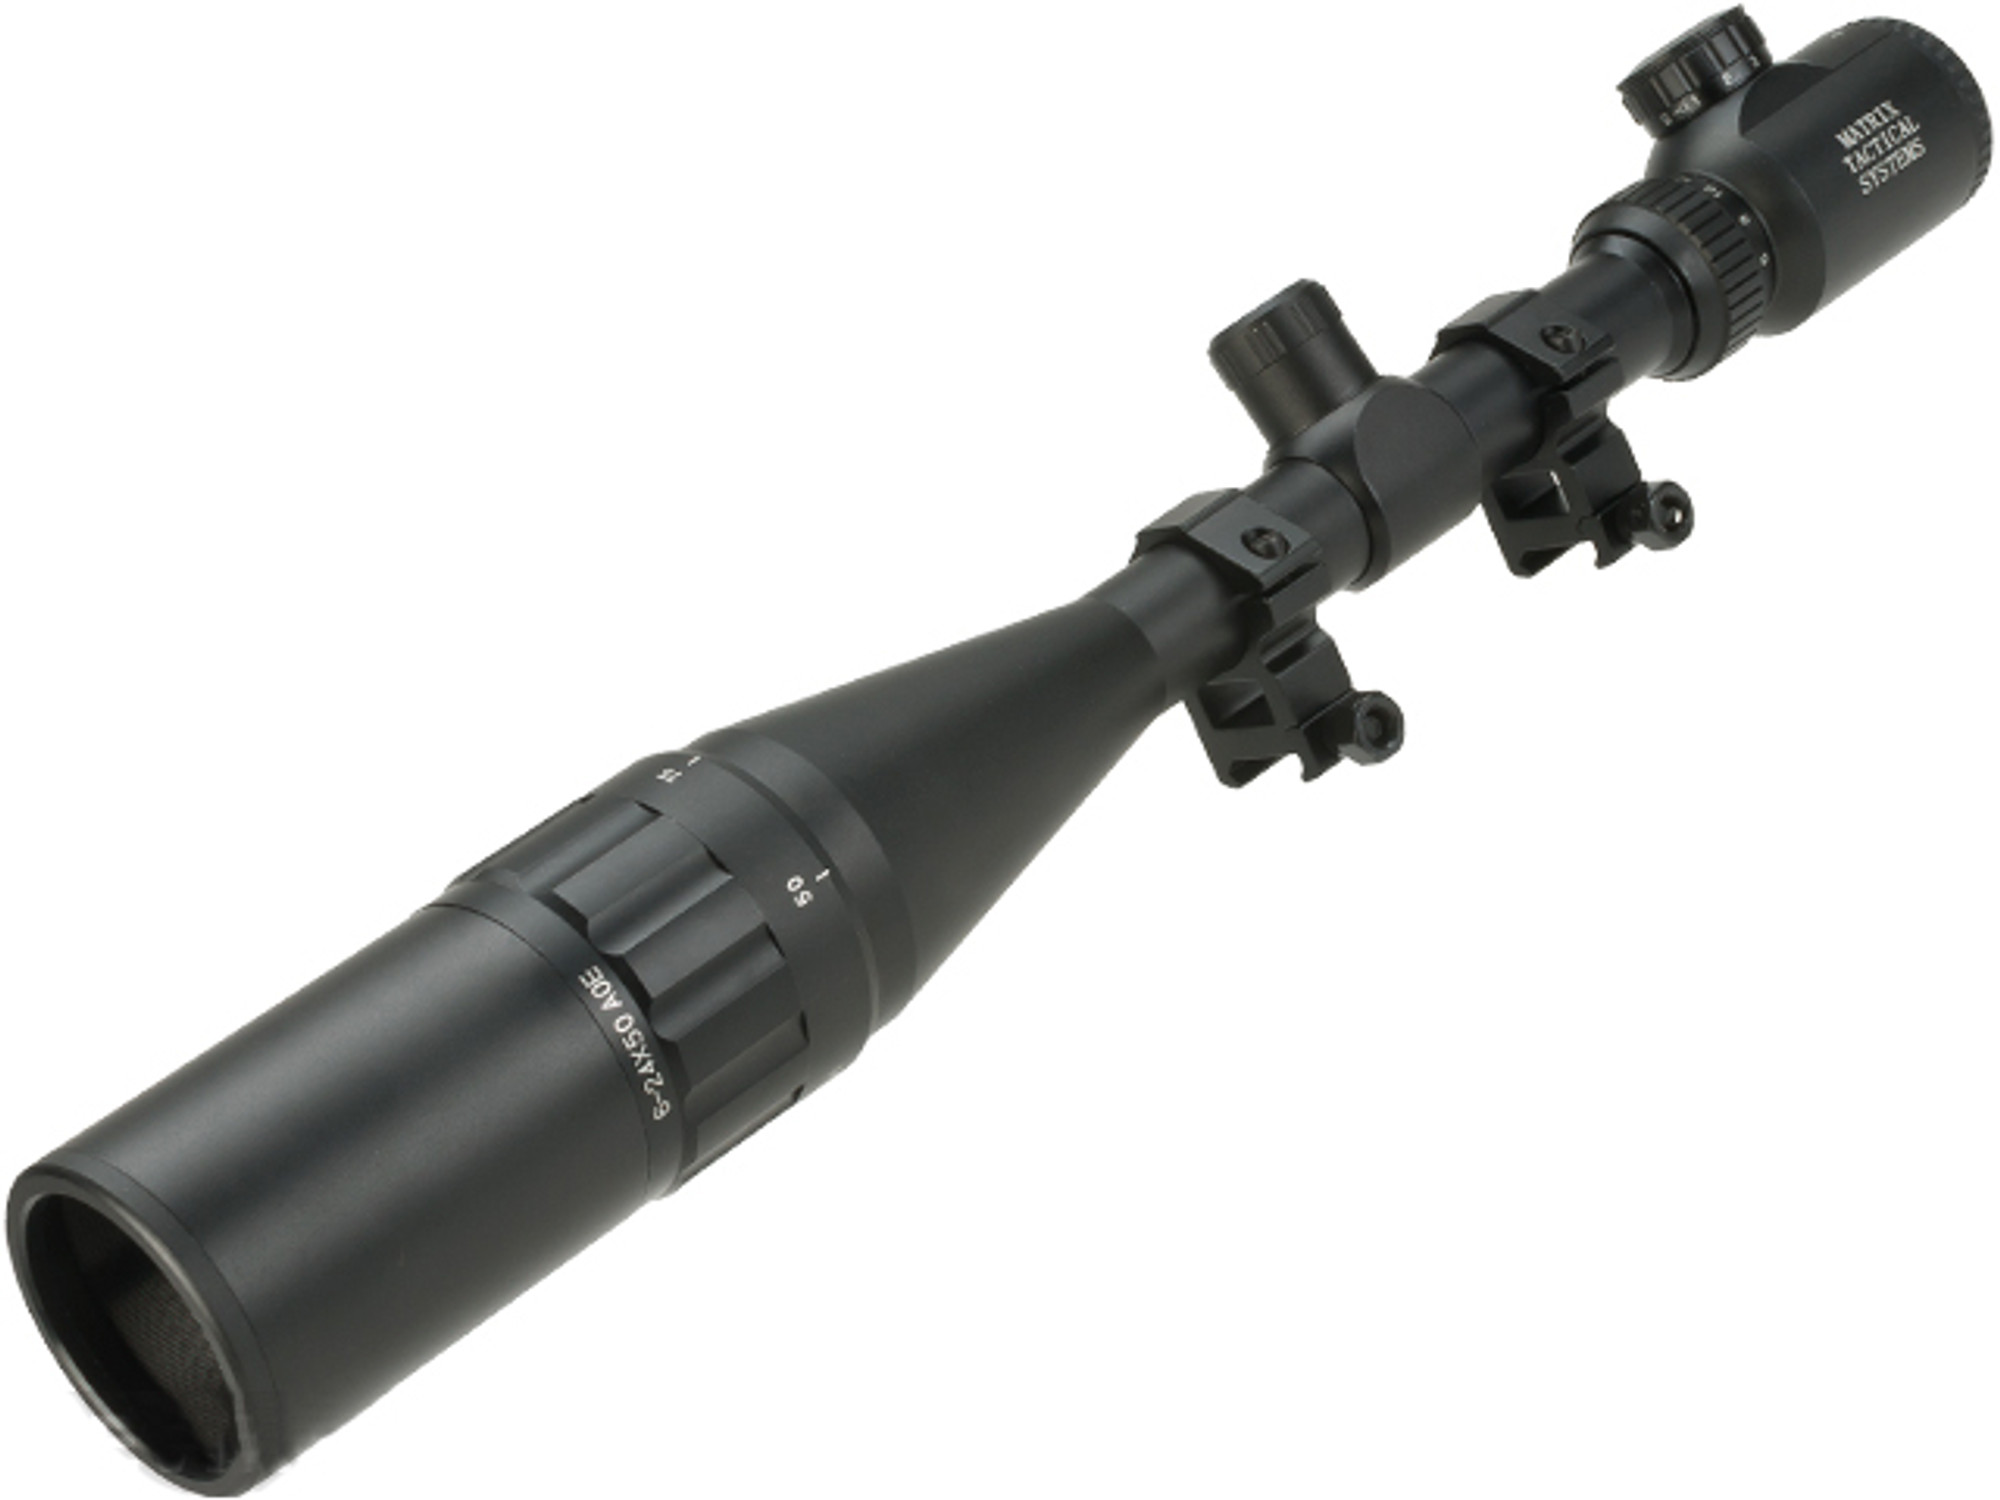 Matrix M2019 6-24x50AOE Illuminated Scope with Mounting Rings, Lens Covers and Sunshade